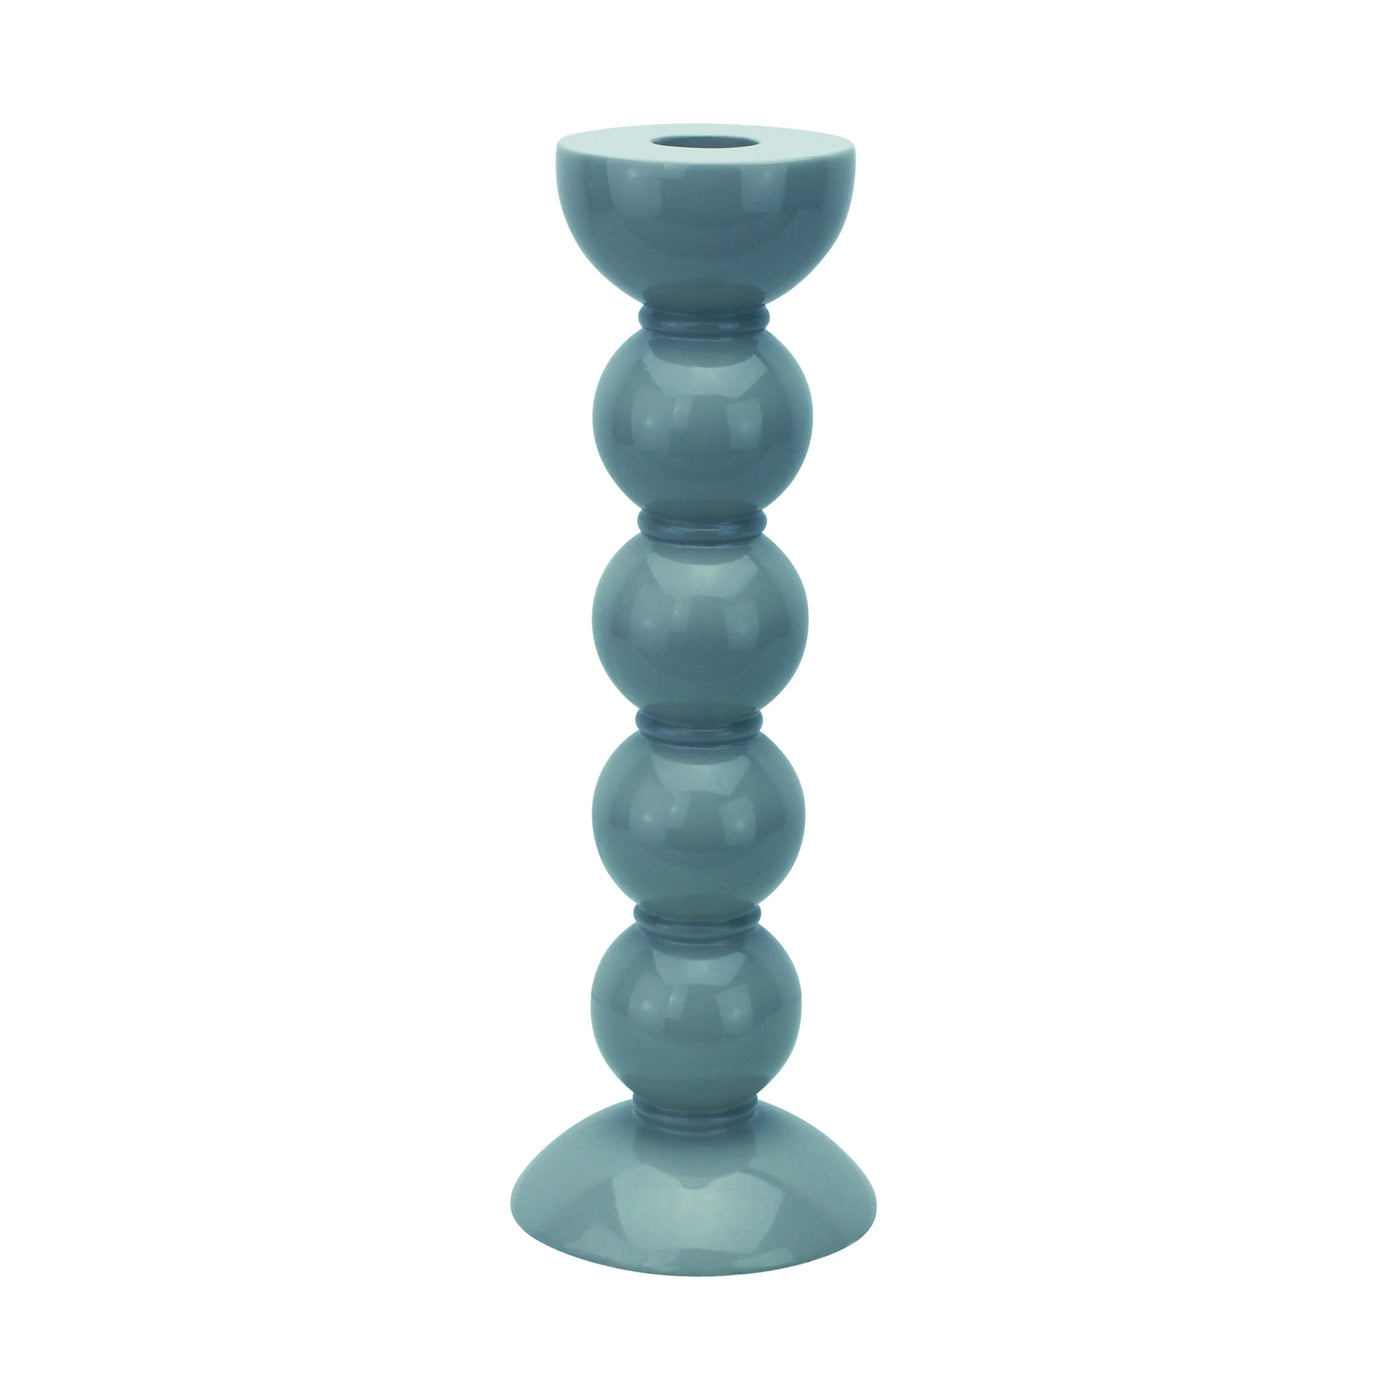 Addison Ross Bobbin Candlestick-Home/Giftware-Chambray Blue-24CM-Kevin's Fine Outdoor Gear & Apparel